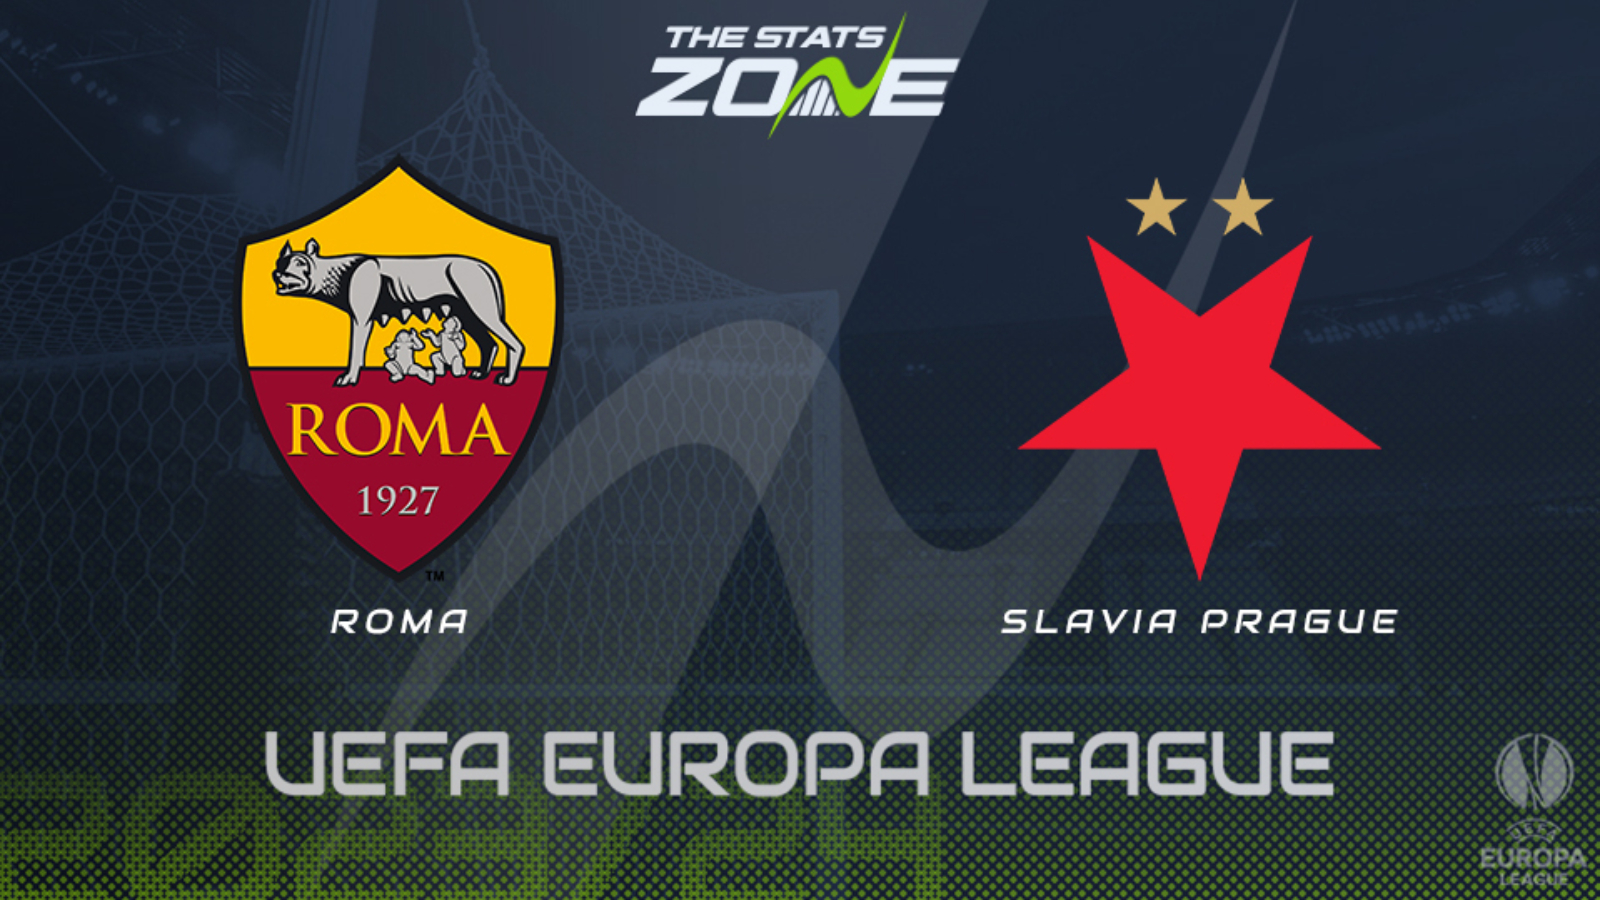 AS Roma And Slavia Prague Win Big In Group G Of Europa League